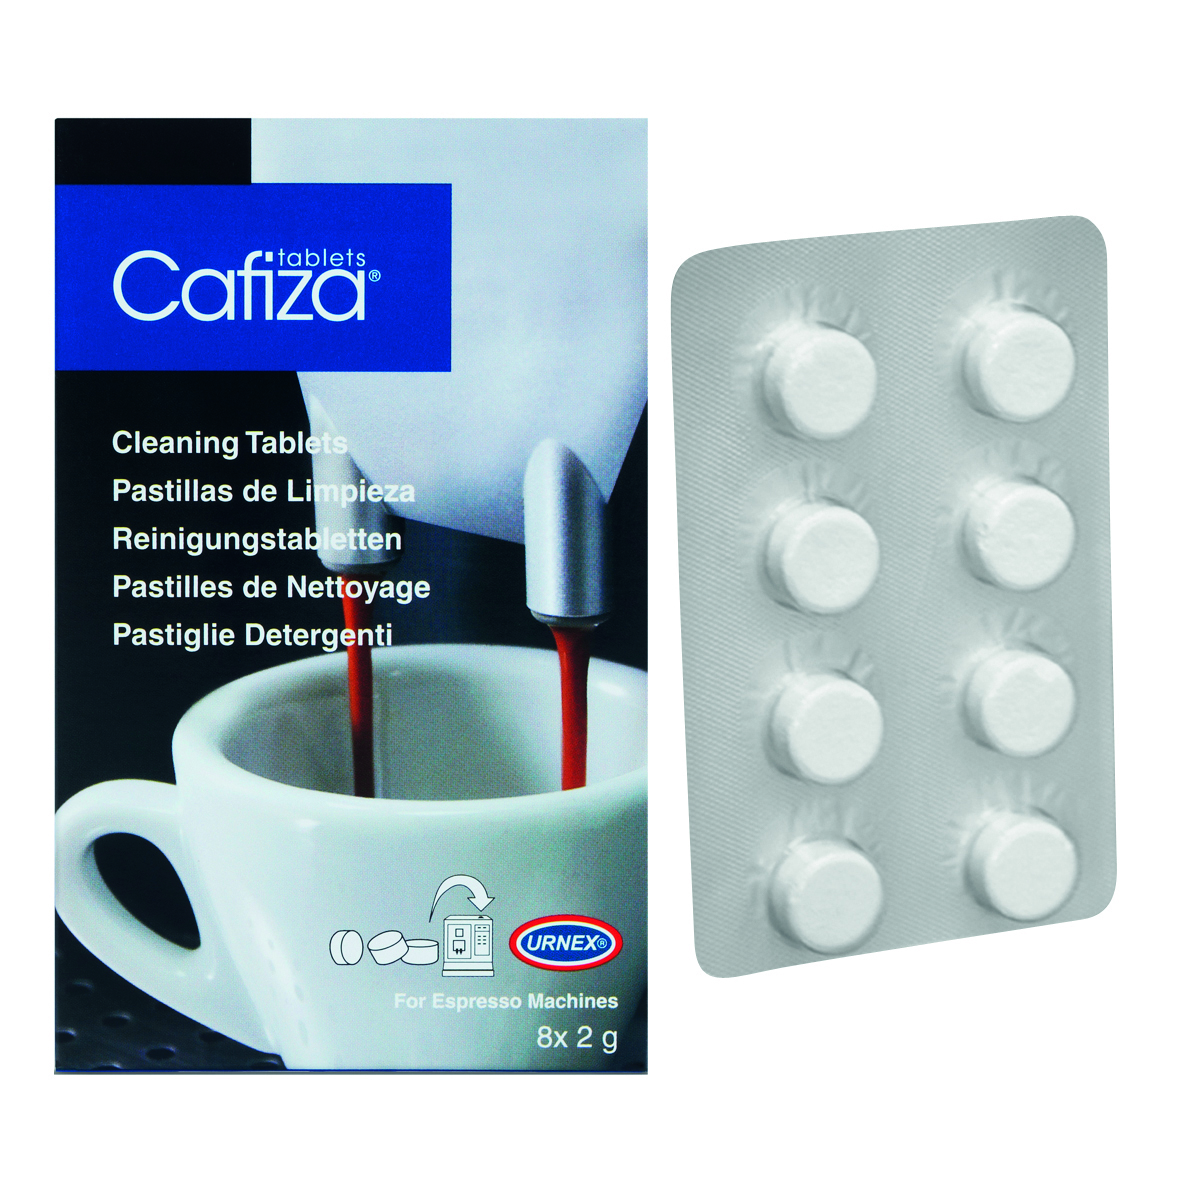 Cafiza Blister Cleaning Tablets, 2 g